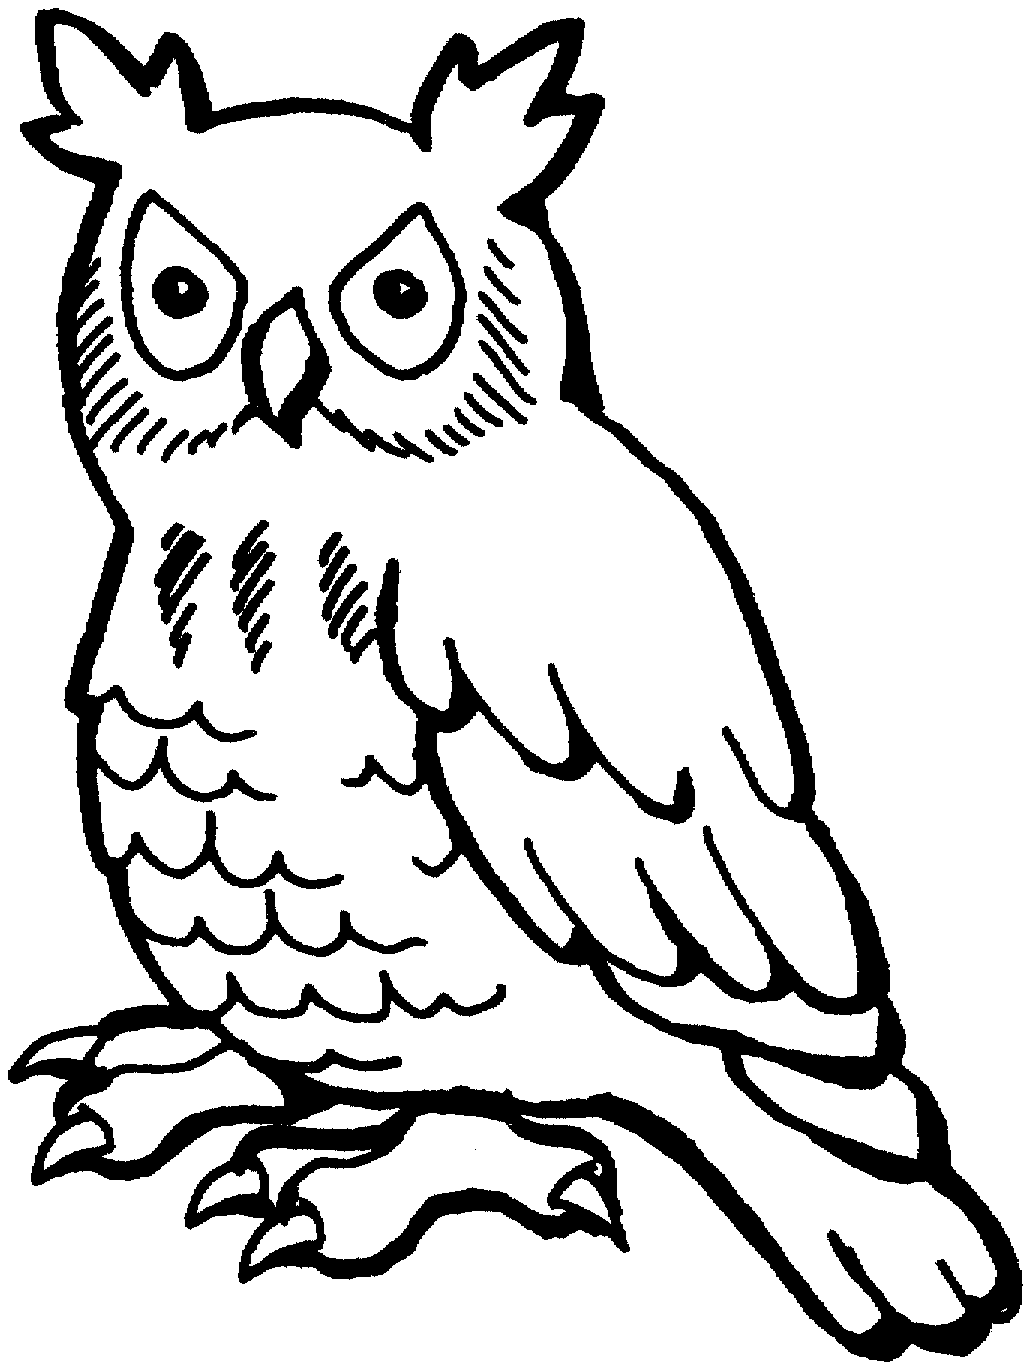 pictures of owls to color owl coloring pages print free printable cute owl coloring of to color owls pictures 